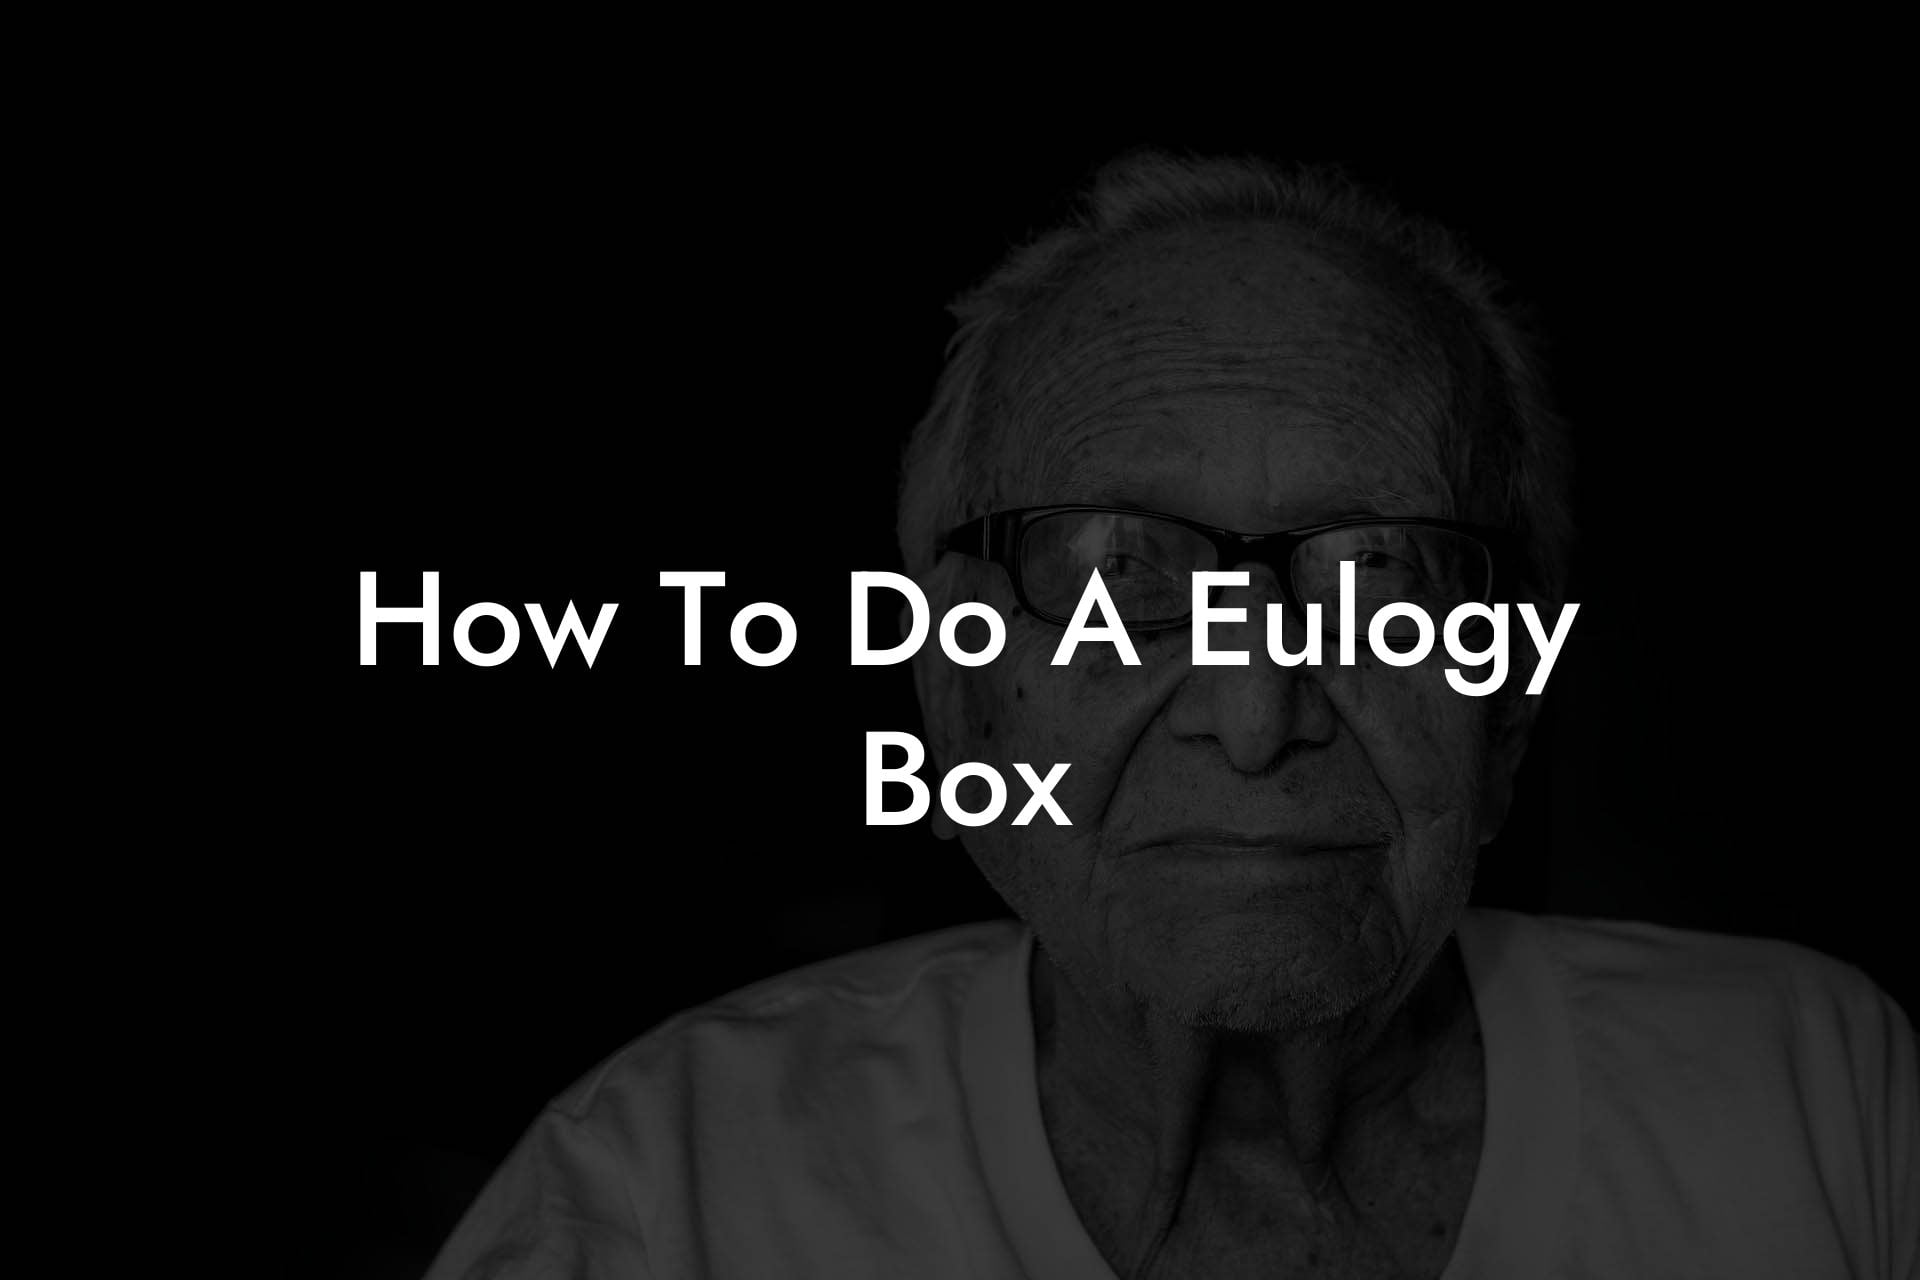 How To Do A Eulogy Box